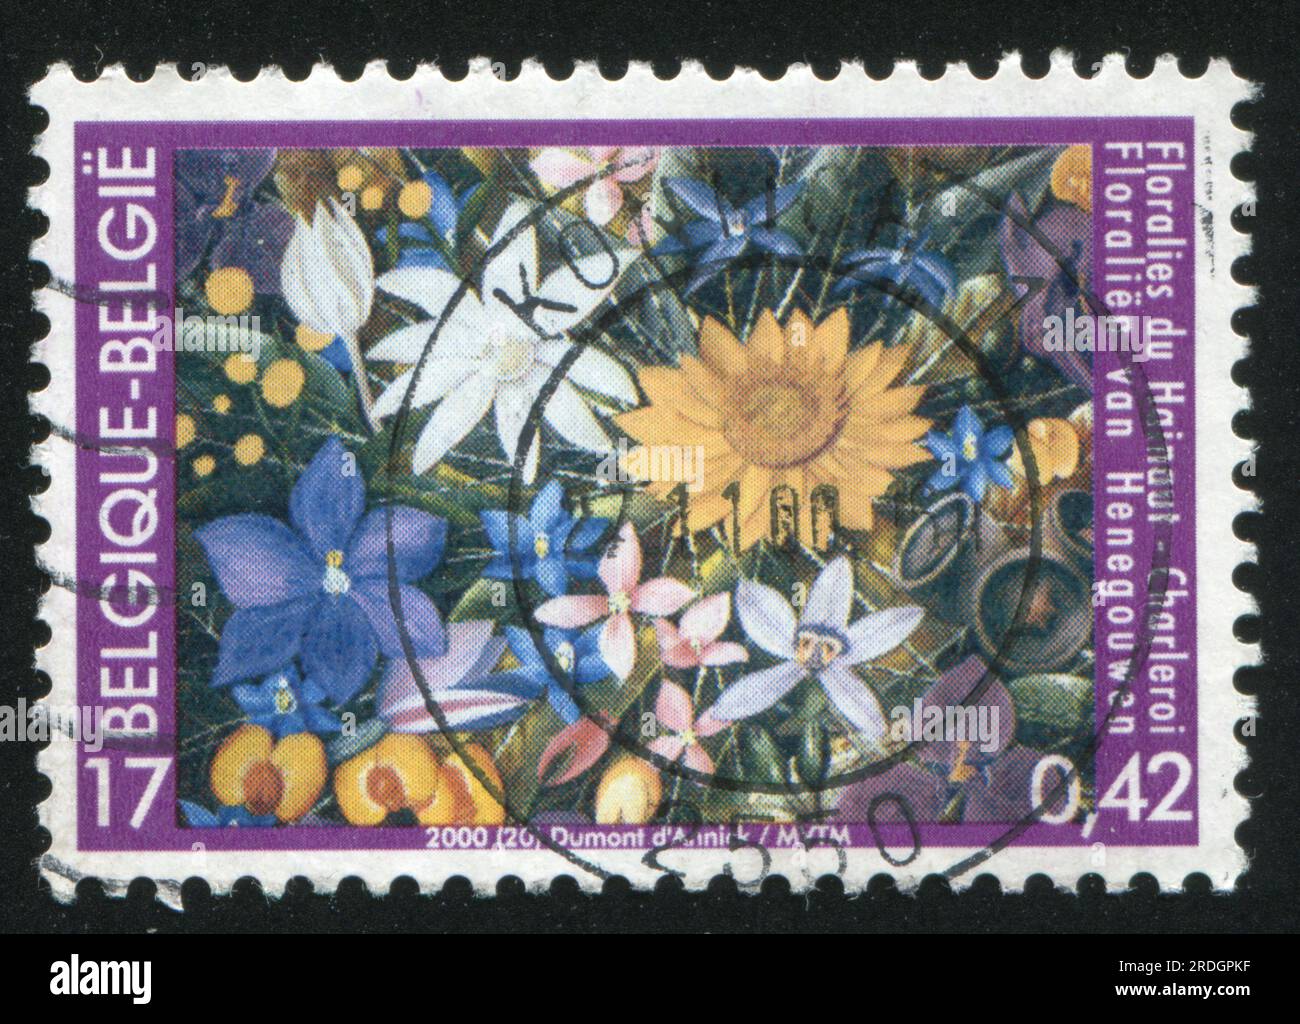 RUSSIA KALININGRAD, 19 OCTOBER 2015: stamp printed by Belgium, shows Hainault Flower Show, circa 2000 Stock Photo